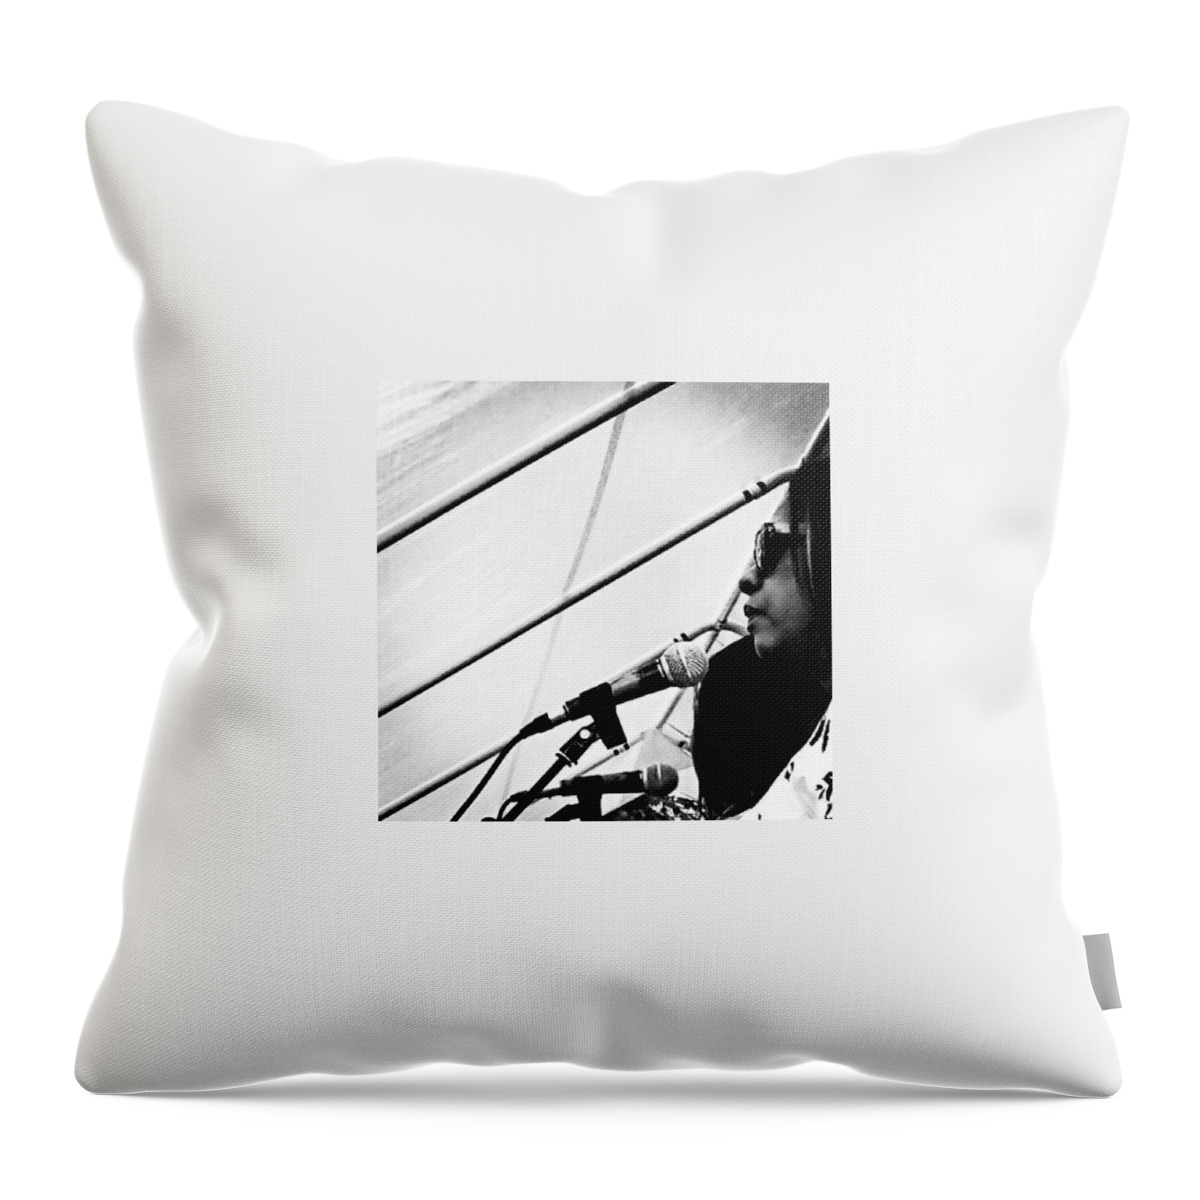 Favoritesong Throw Pillow featuring the photograph The Singers by Jason Roust